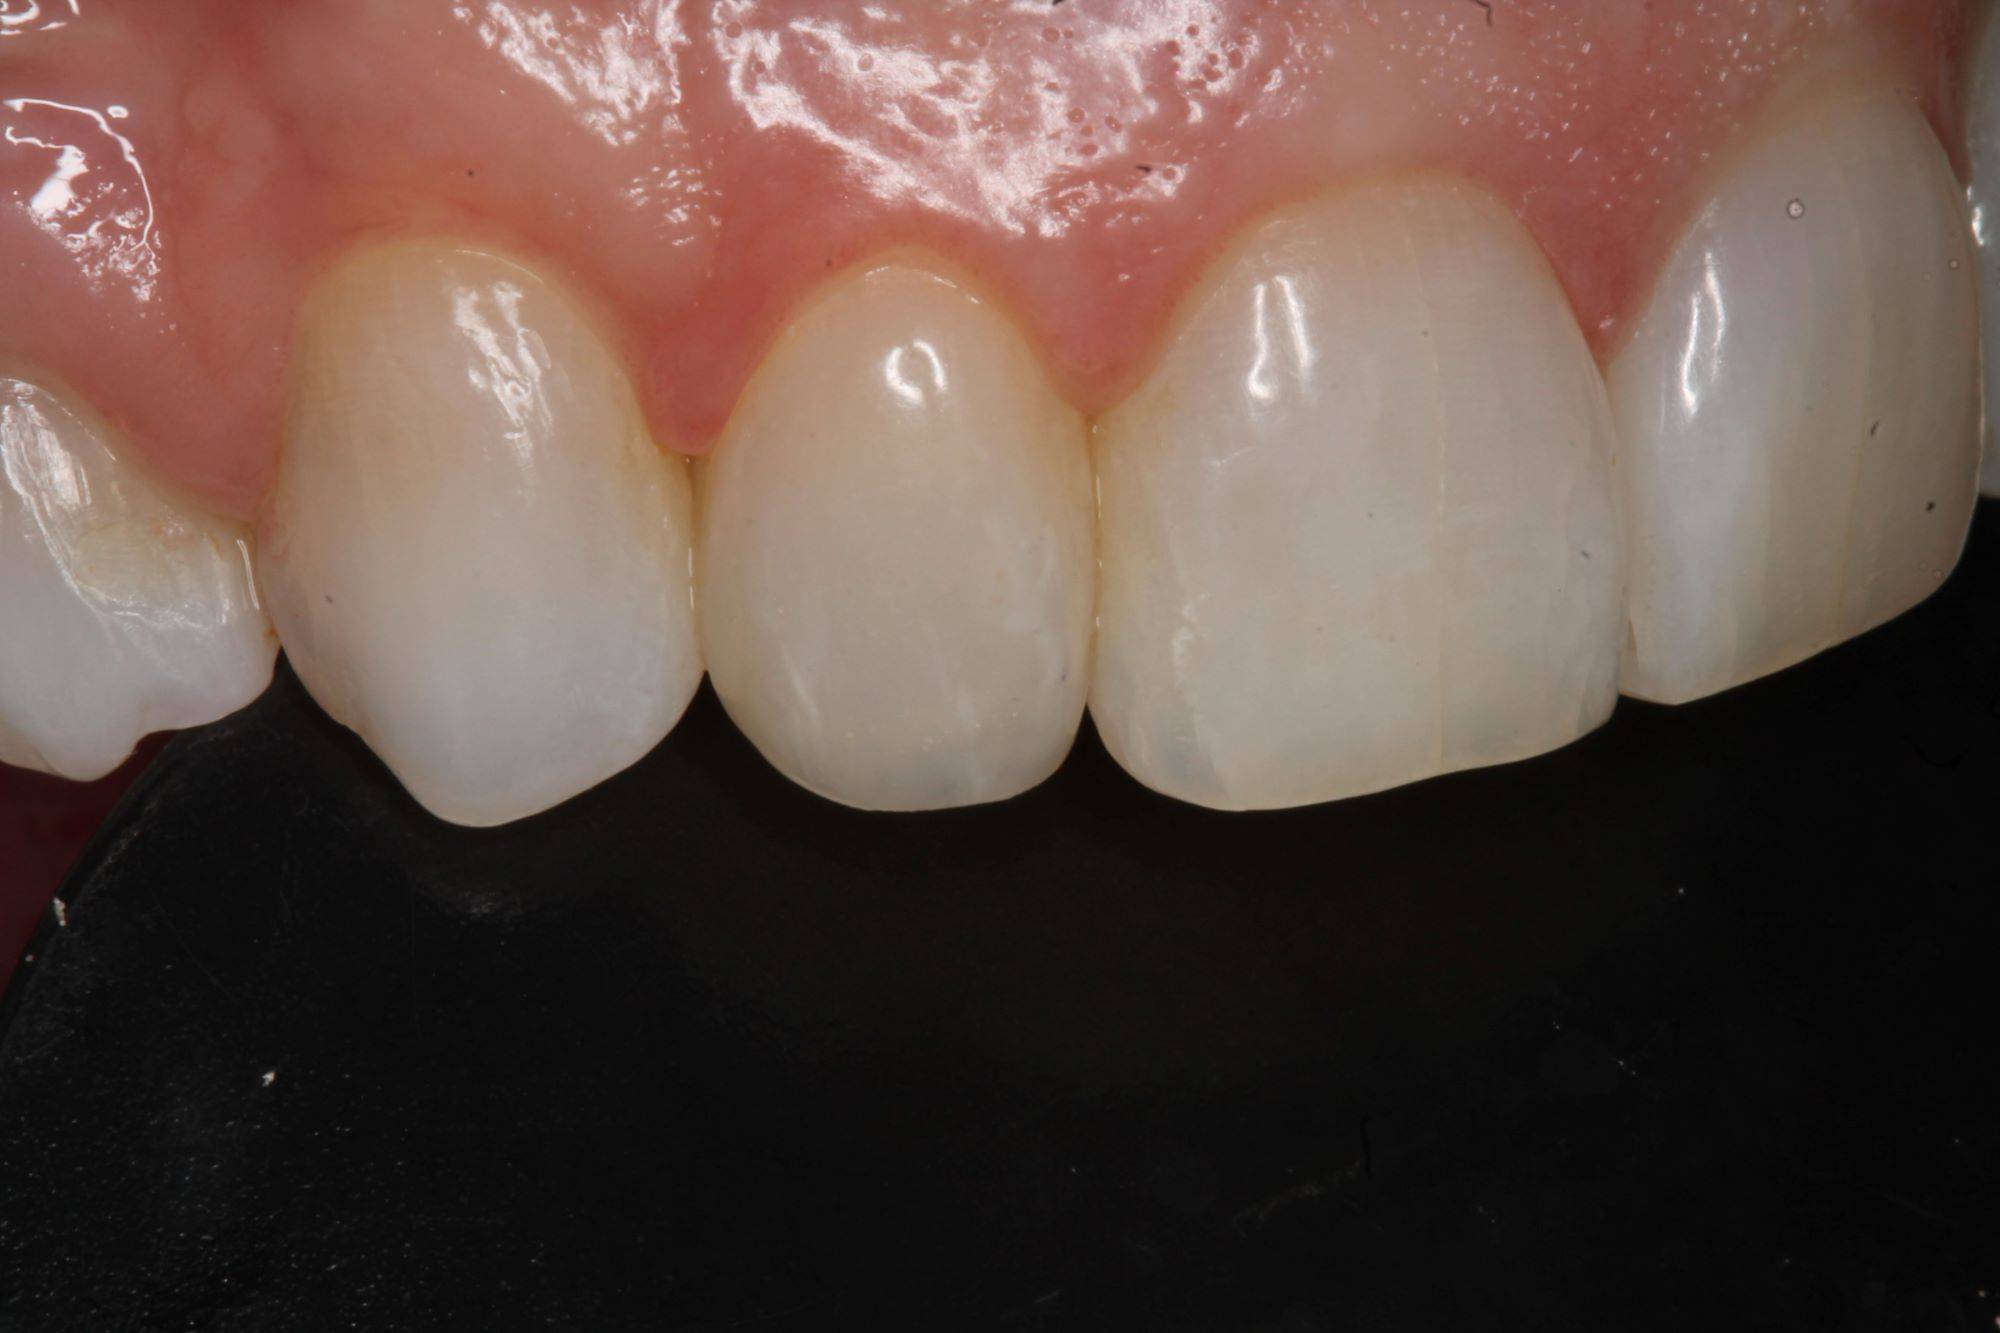 Smile close-up showing even lateral incisor post procedure